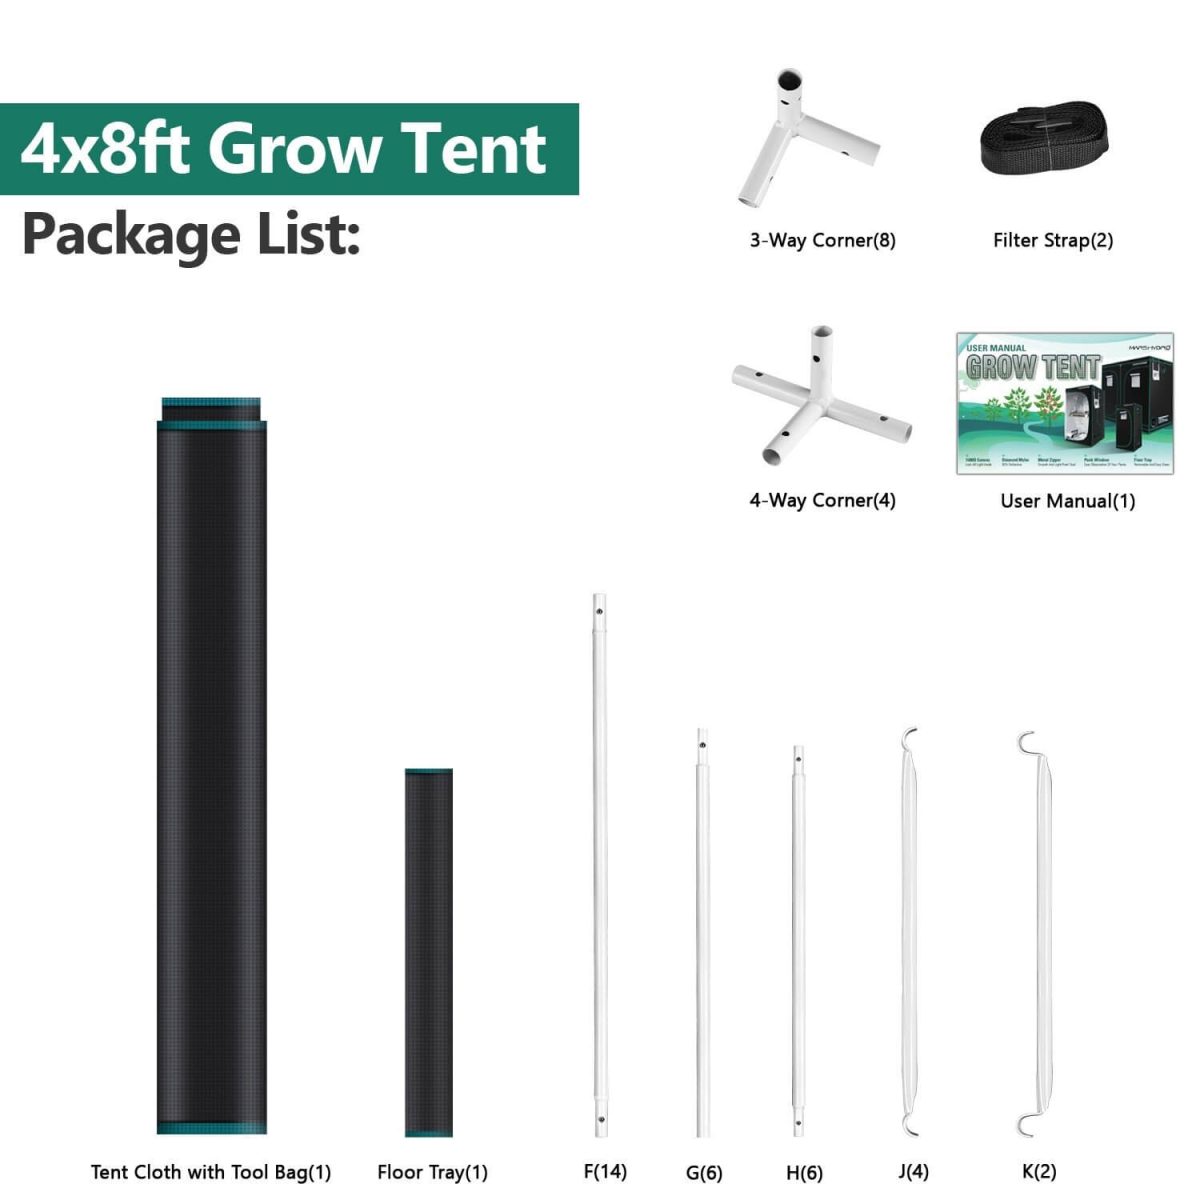 In 240x120x200cm tent package, you will receive user manual, corner, filter strap, cloth floor tray and the bars